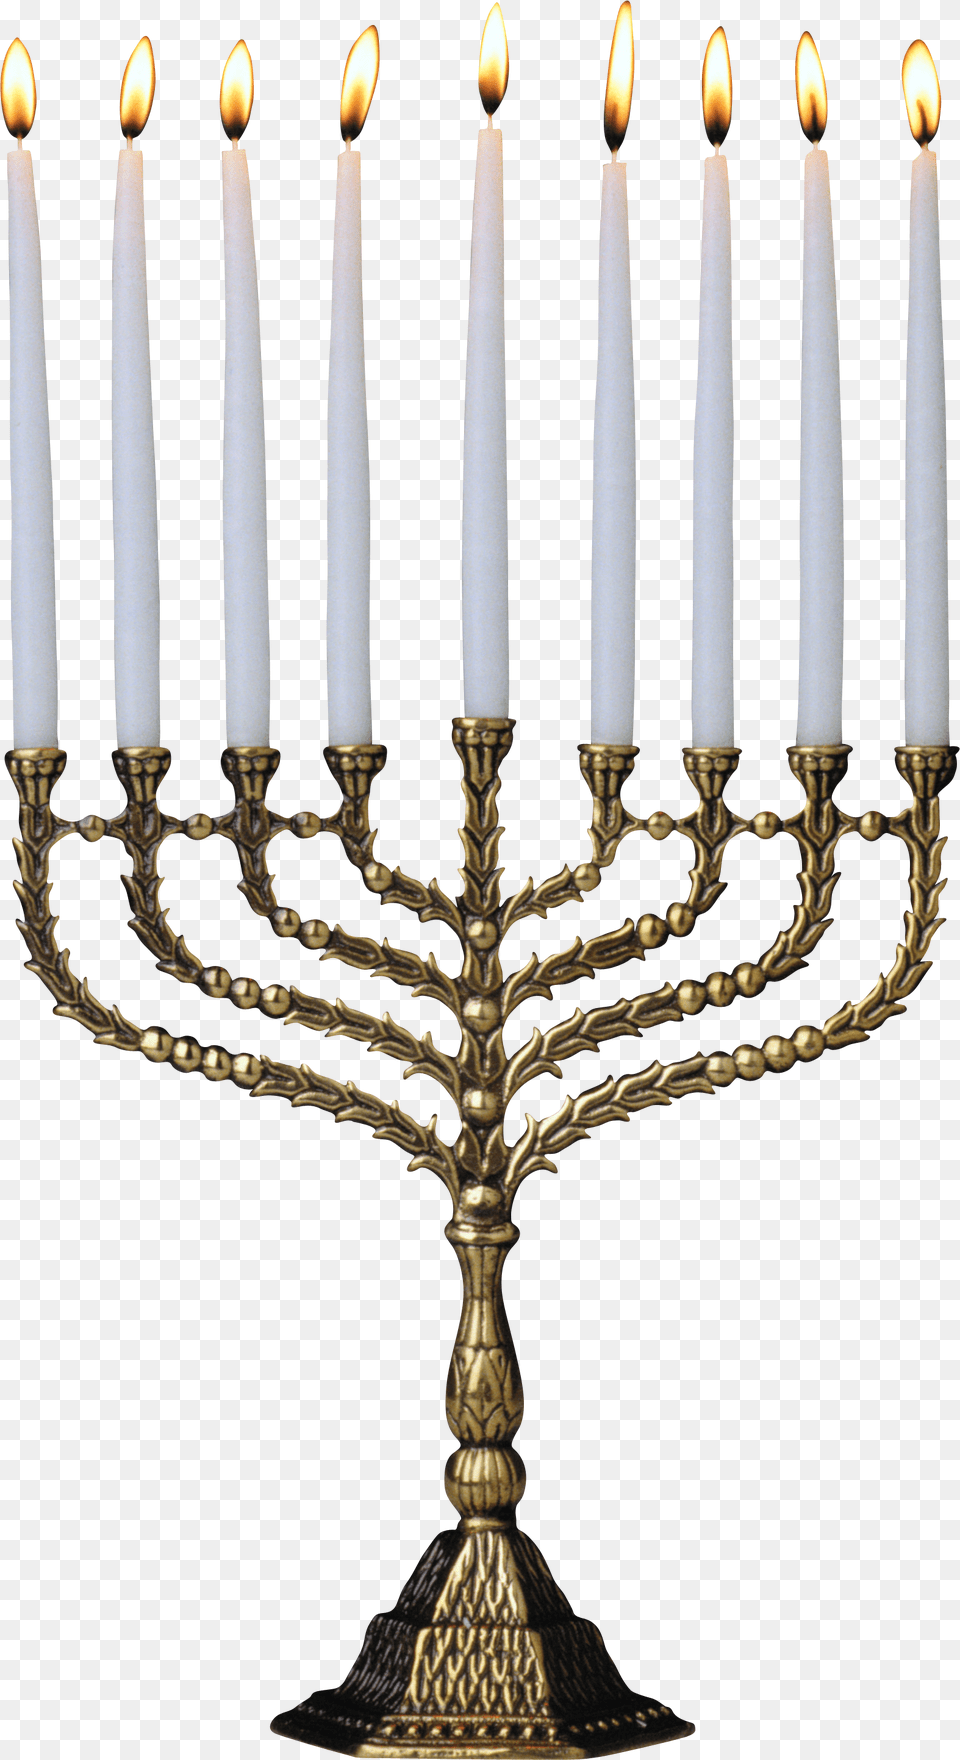 White Candle39s Candle, Festival, Hanukkah Menorah, Candlestick Png Image